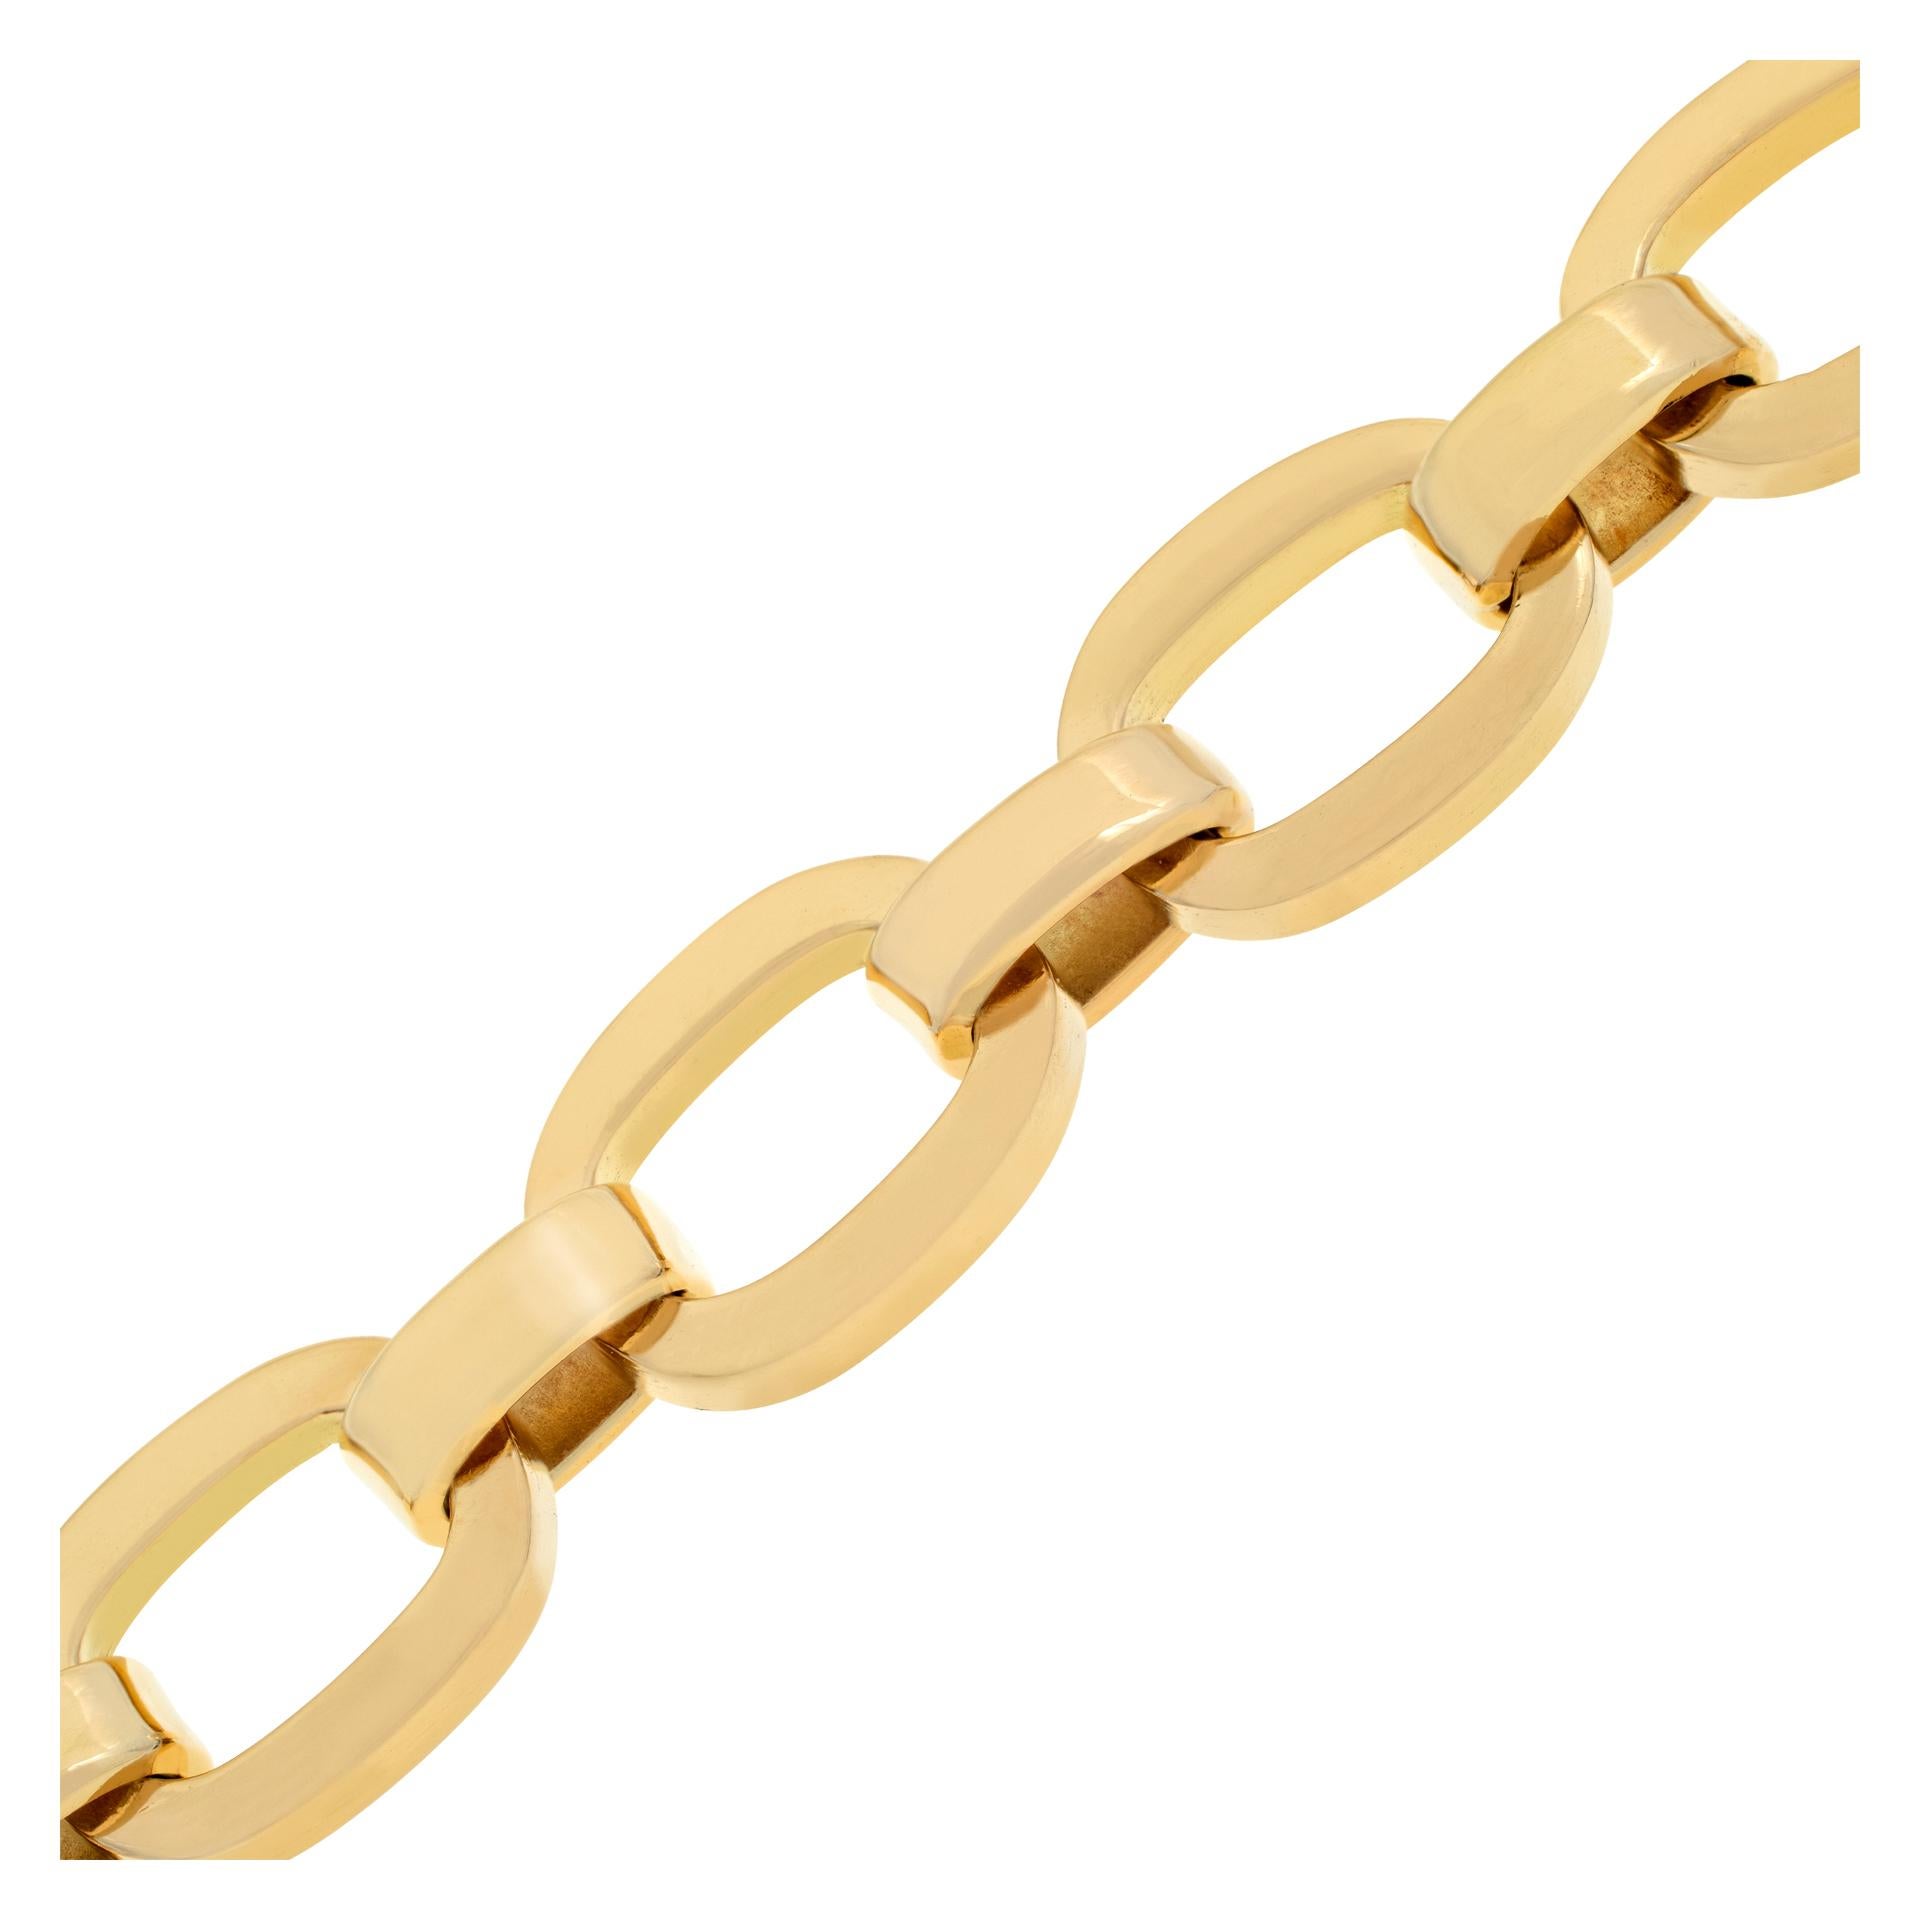 Oval link bracelet in 18k yellow gold. Length 6 inches, width 9mm.